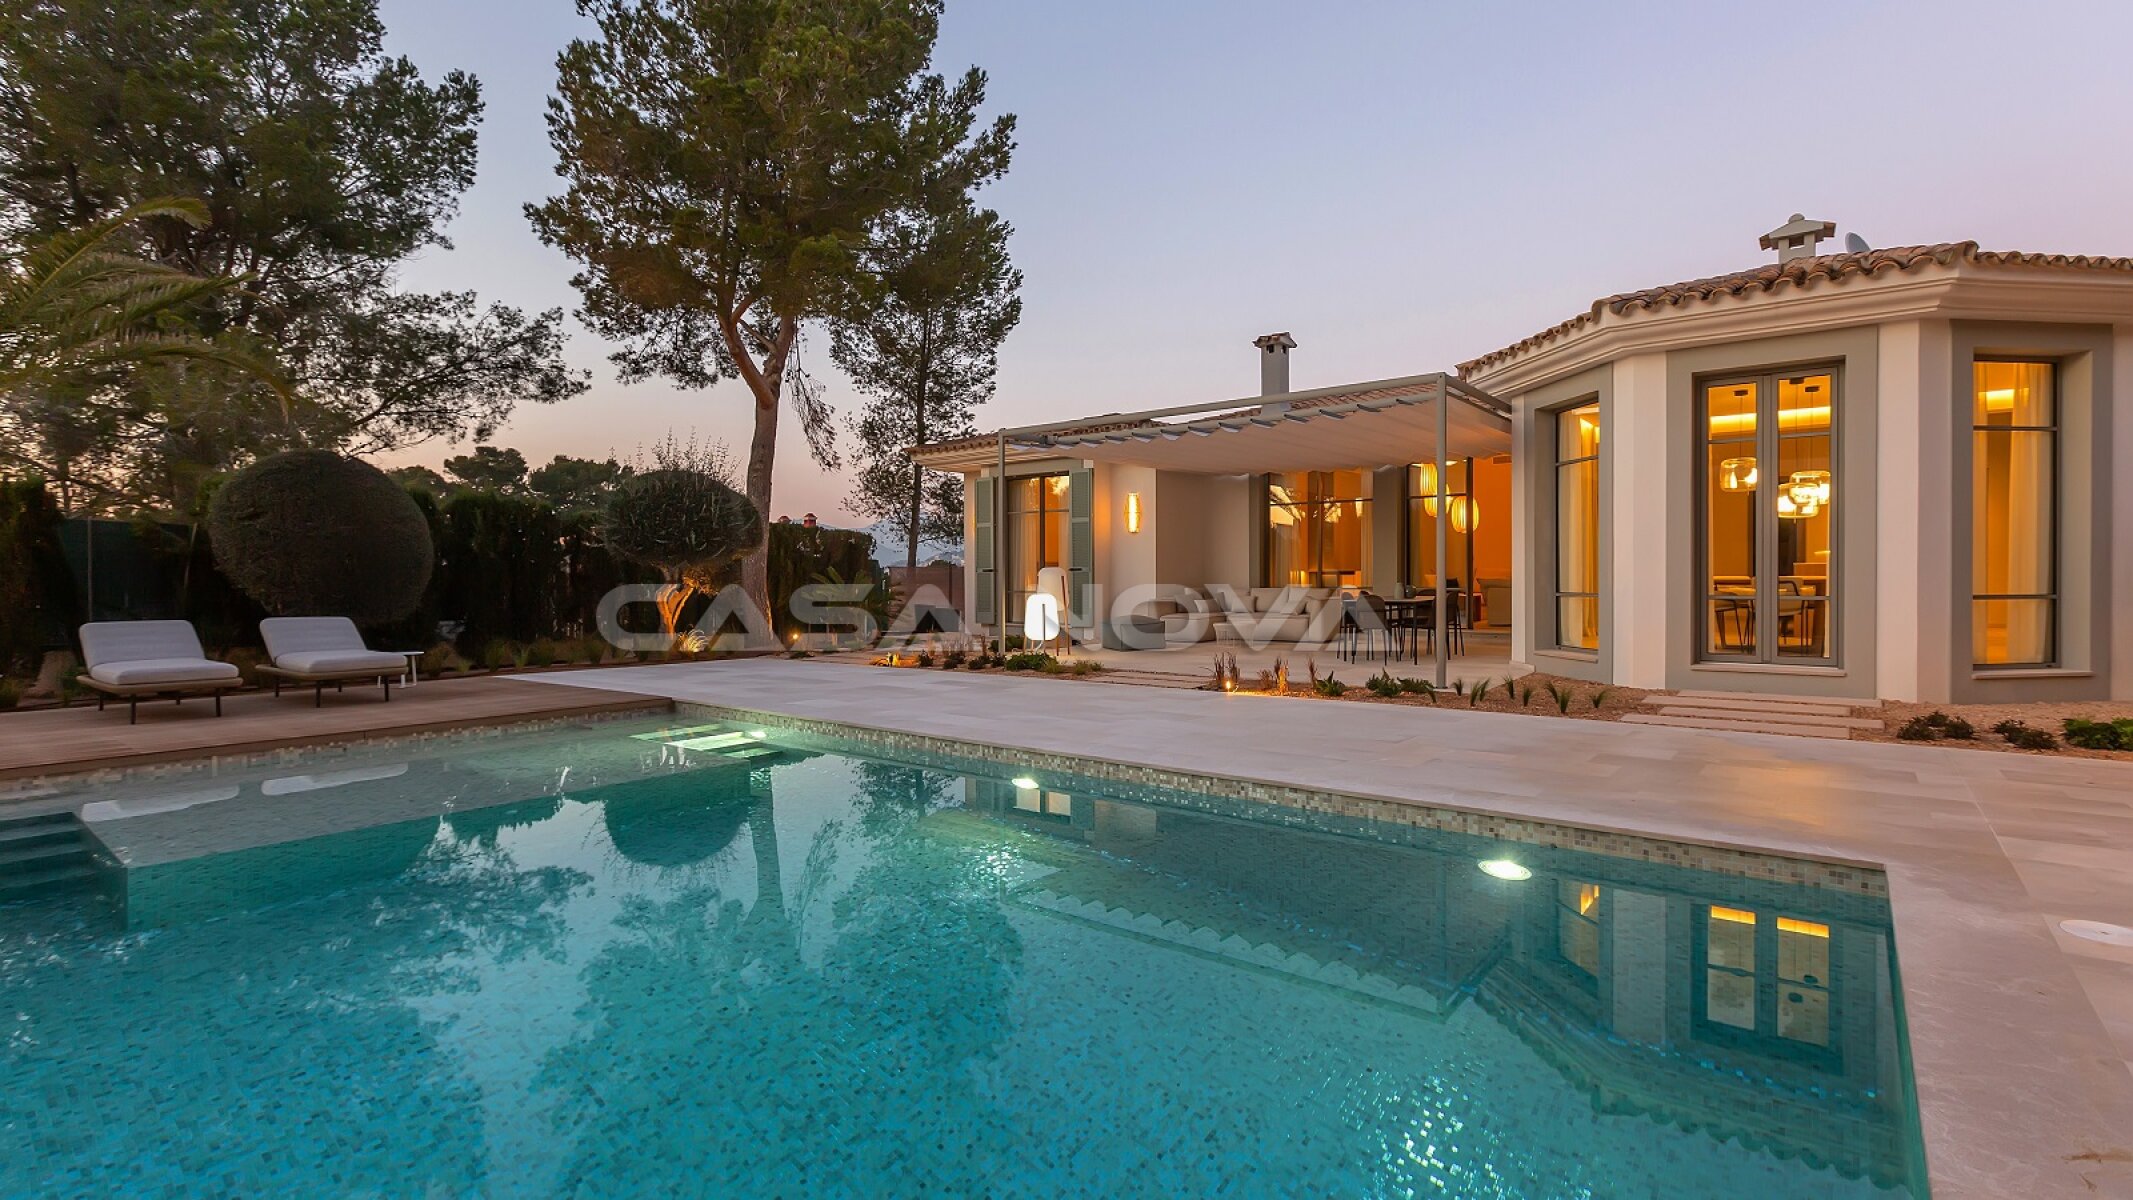 Charming villa with refreshing pool and well-kept garden